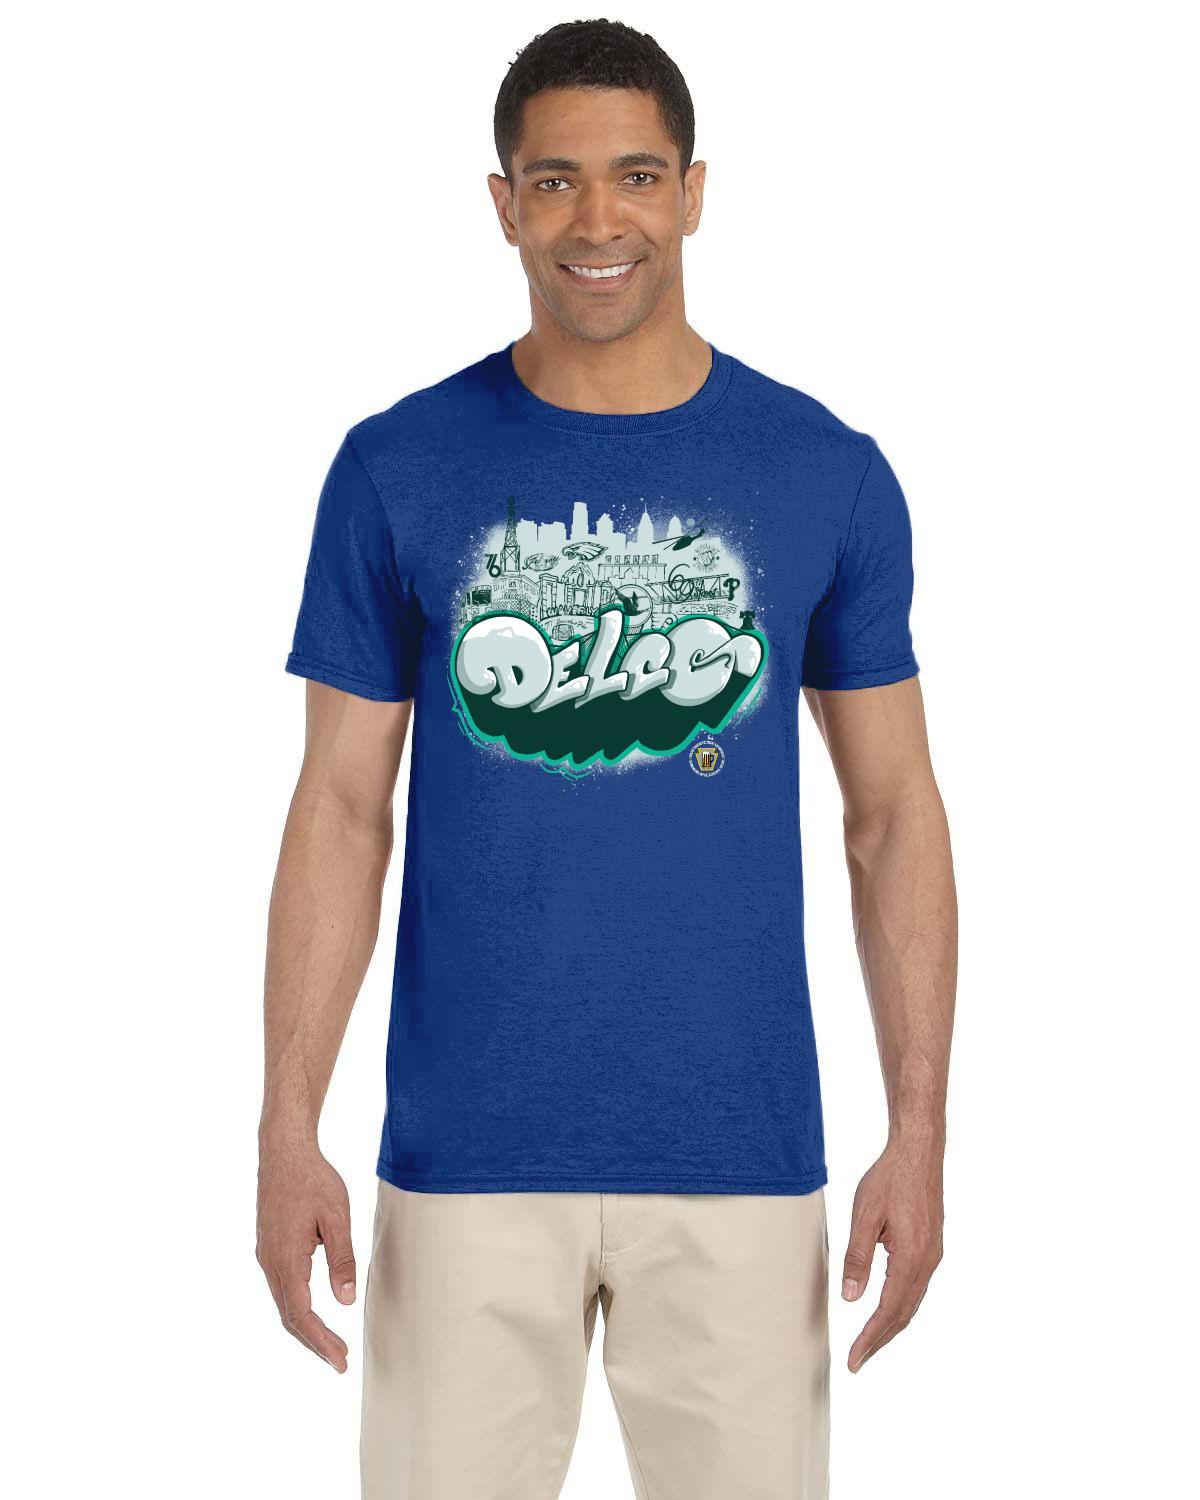 DELCO TAILGATE TOUR Gildan Adult Softstyle 7.5 oz./lin. yd. T-Shirt | G640